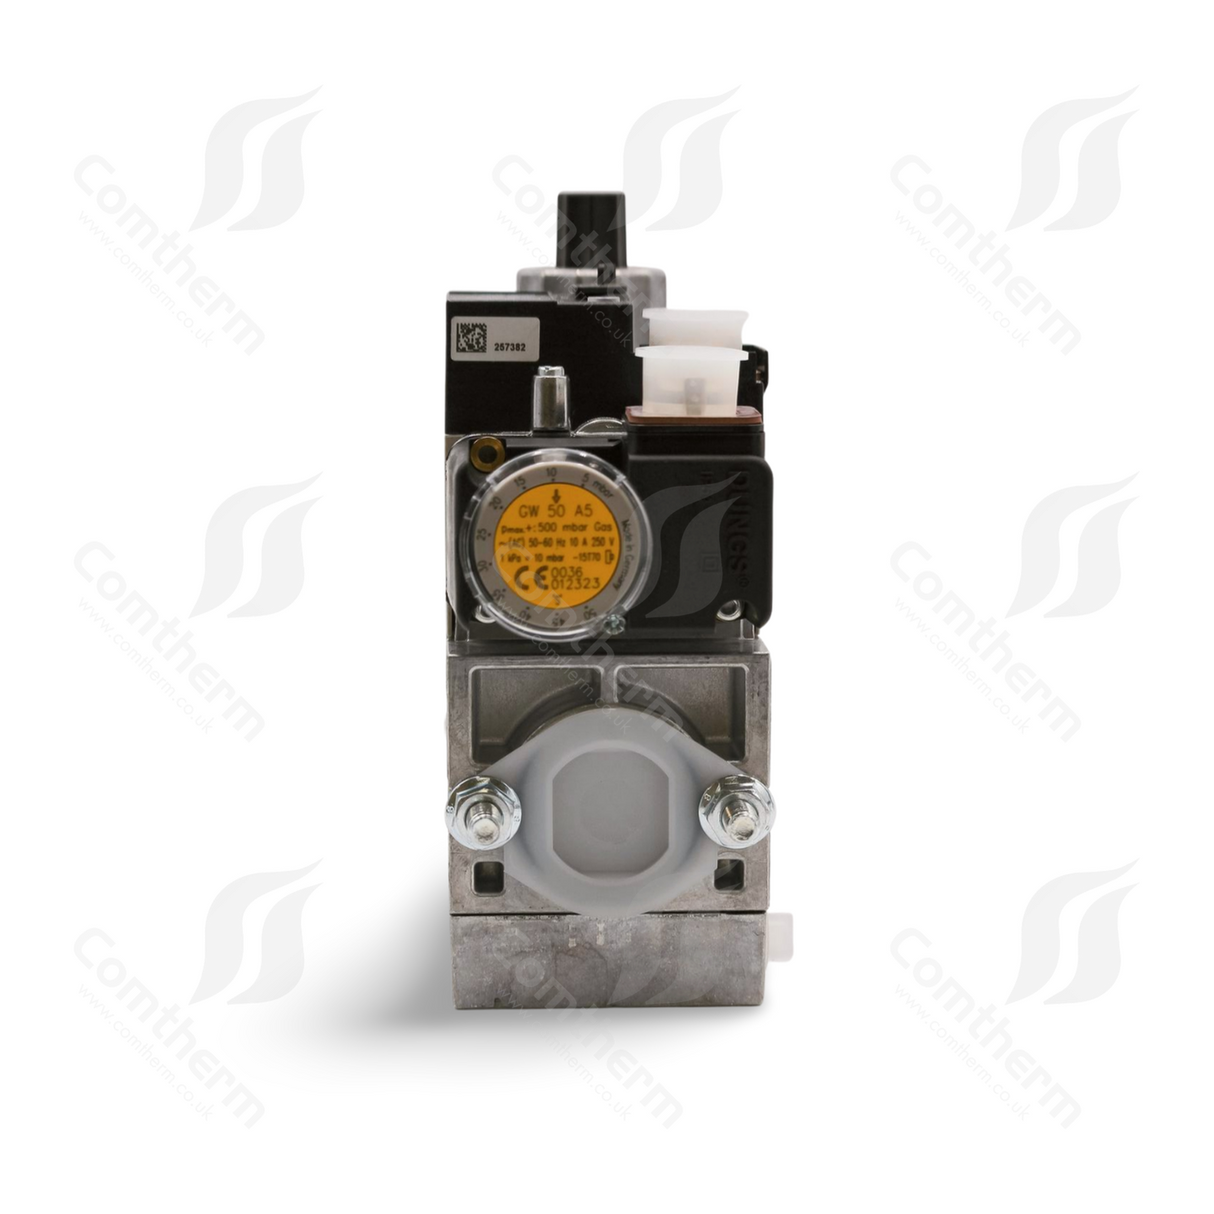 Dungs MB-DLE 407 B01 S52 + GW150A5 Multiblock-Gasventil – 230 V 